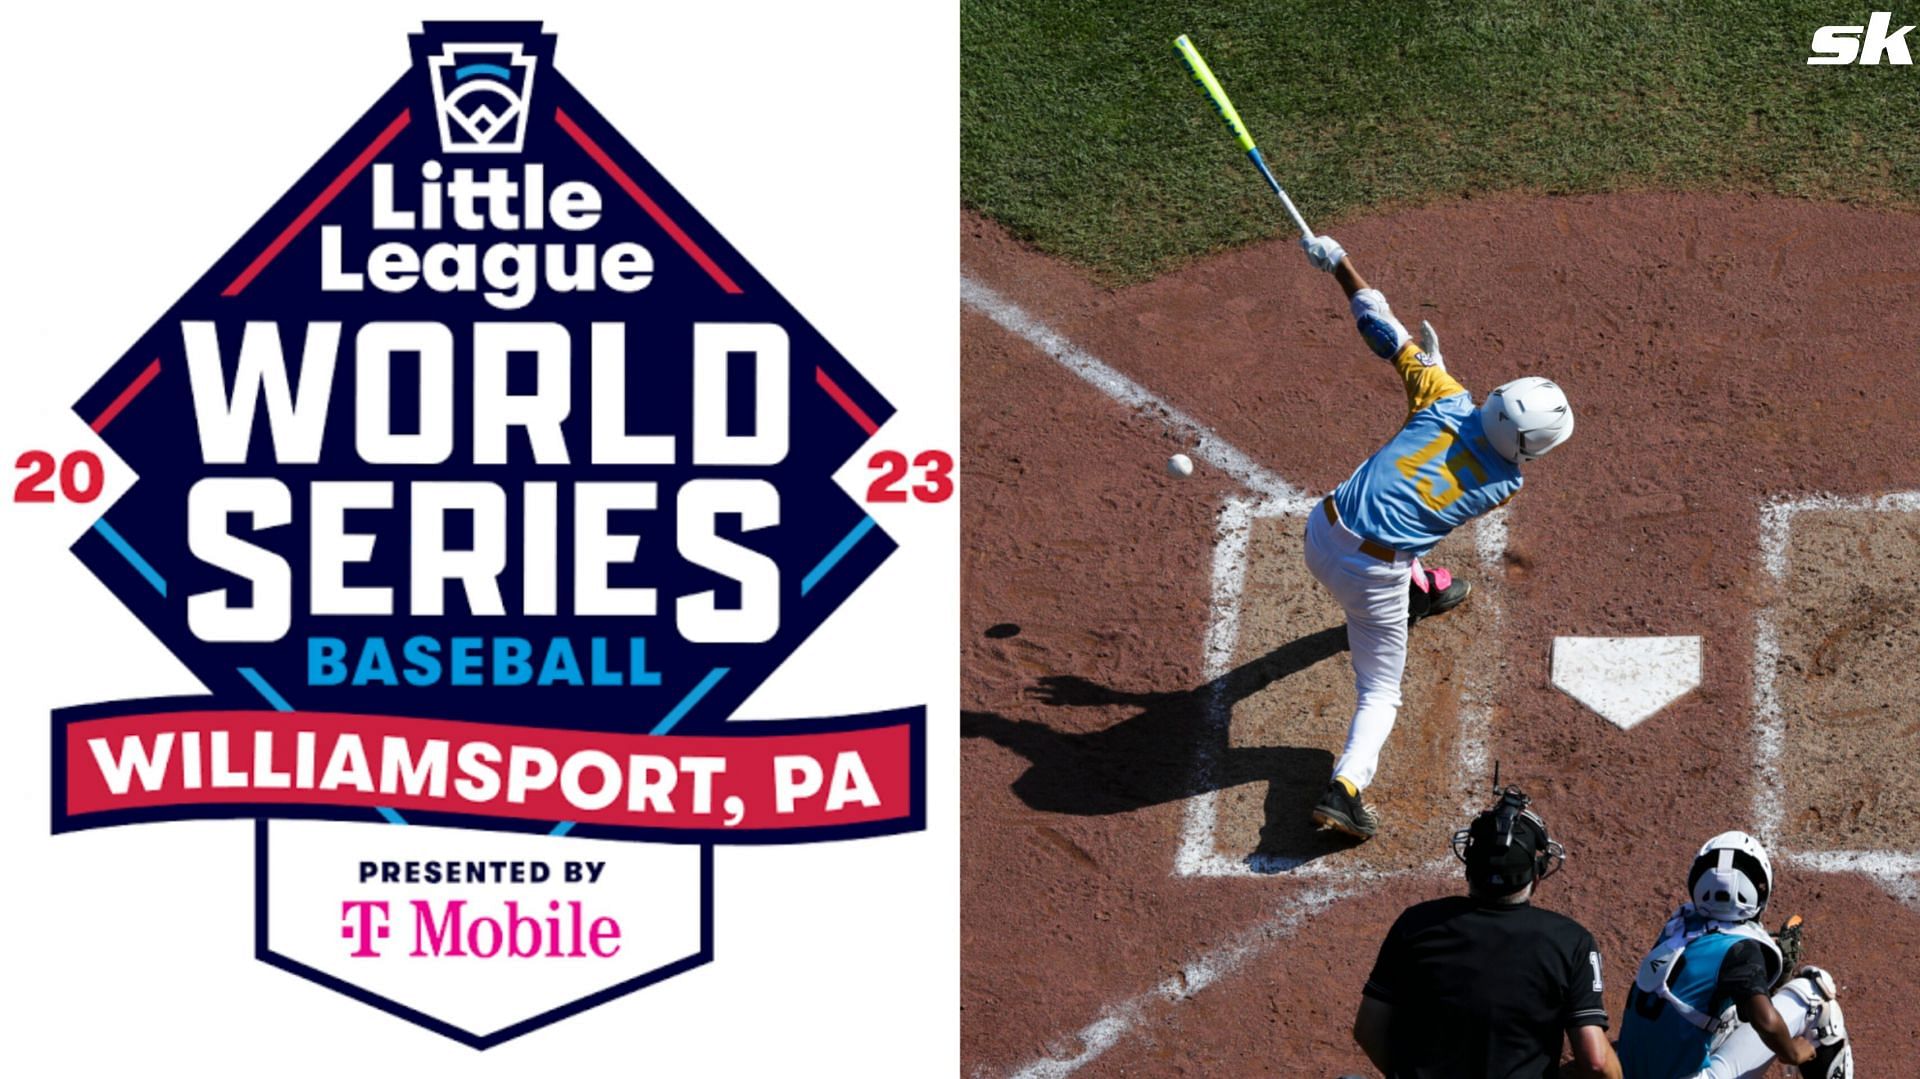 Little League Baseball World Series 2023 will commence on August 16